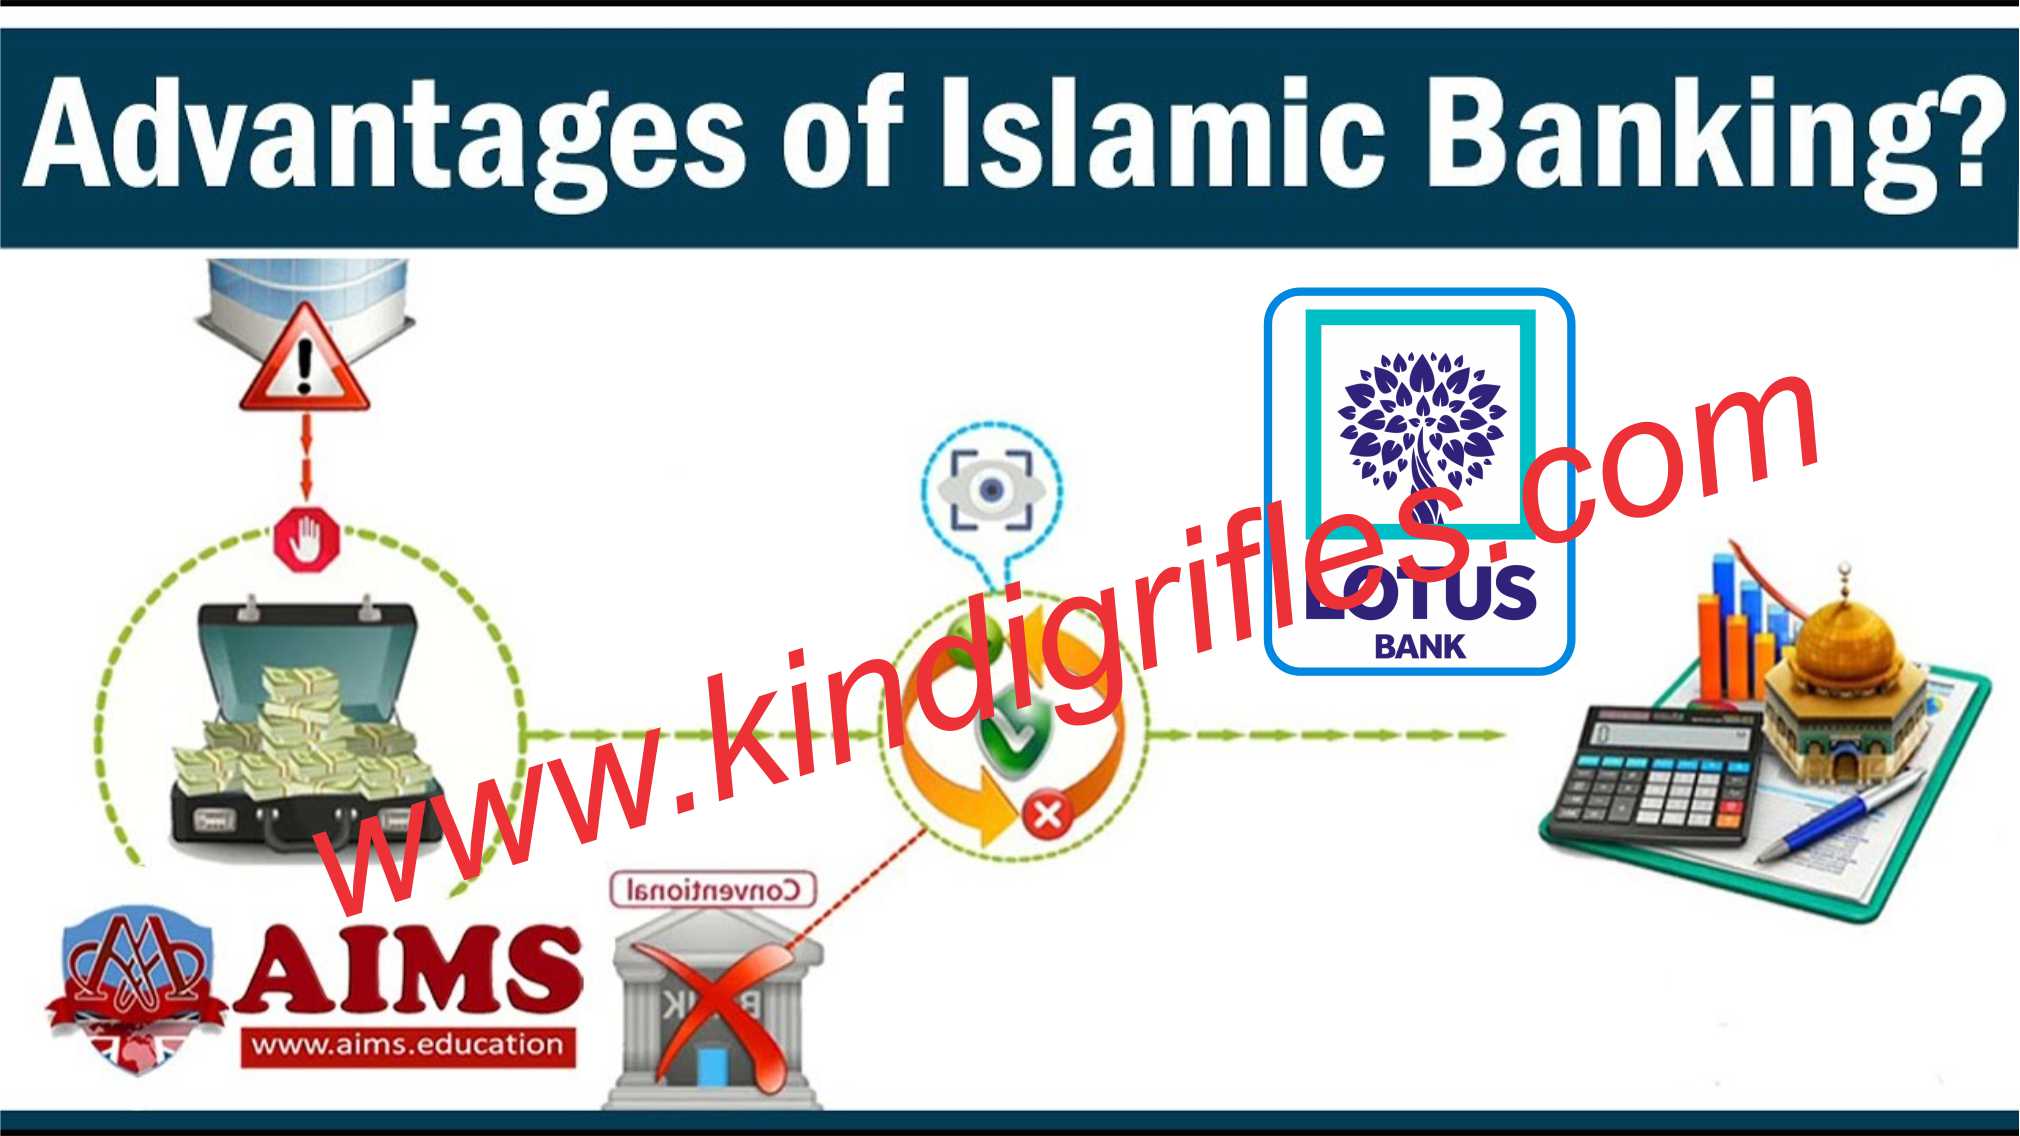 Advantages of Islamic Banking